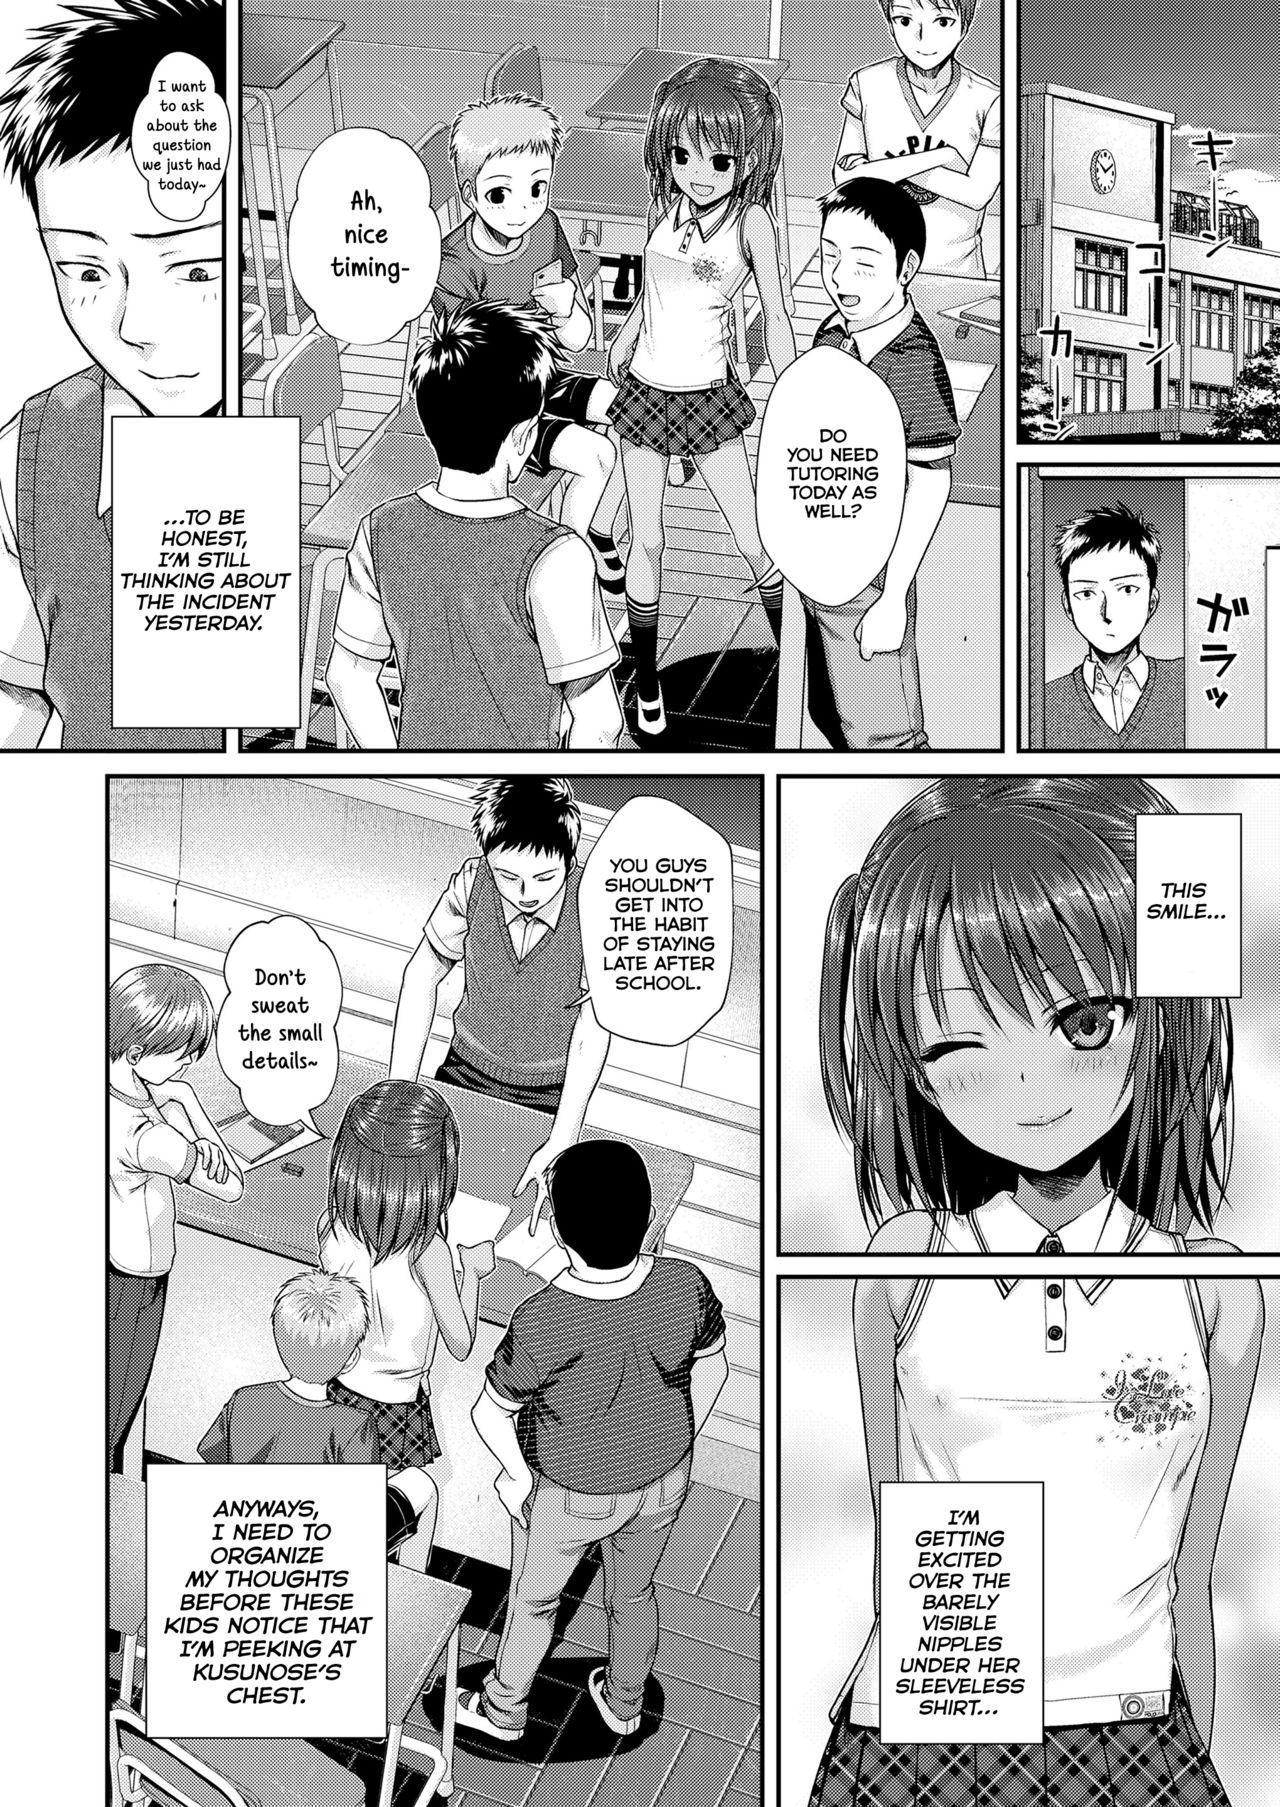 Super Houkago wa Minna de | Together With Everyone After School Missionary - Page 8